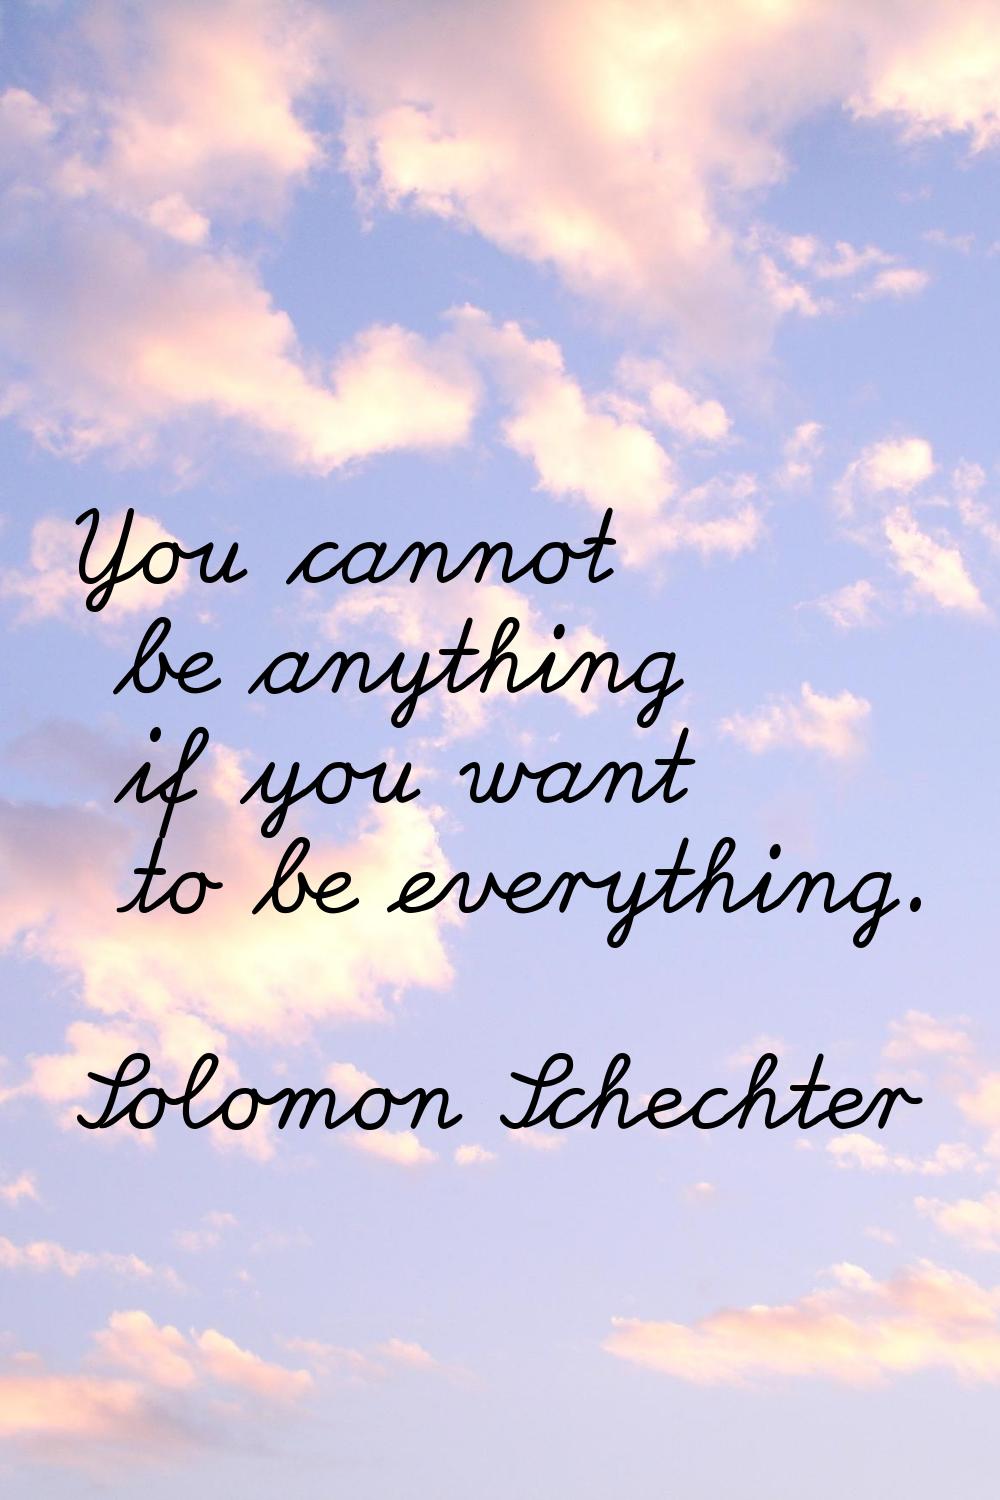 You cannot be anything if you want to be everything.